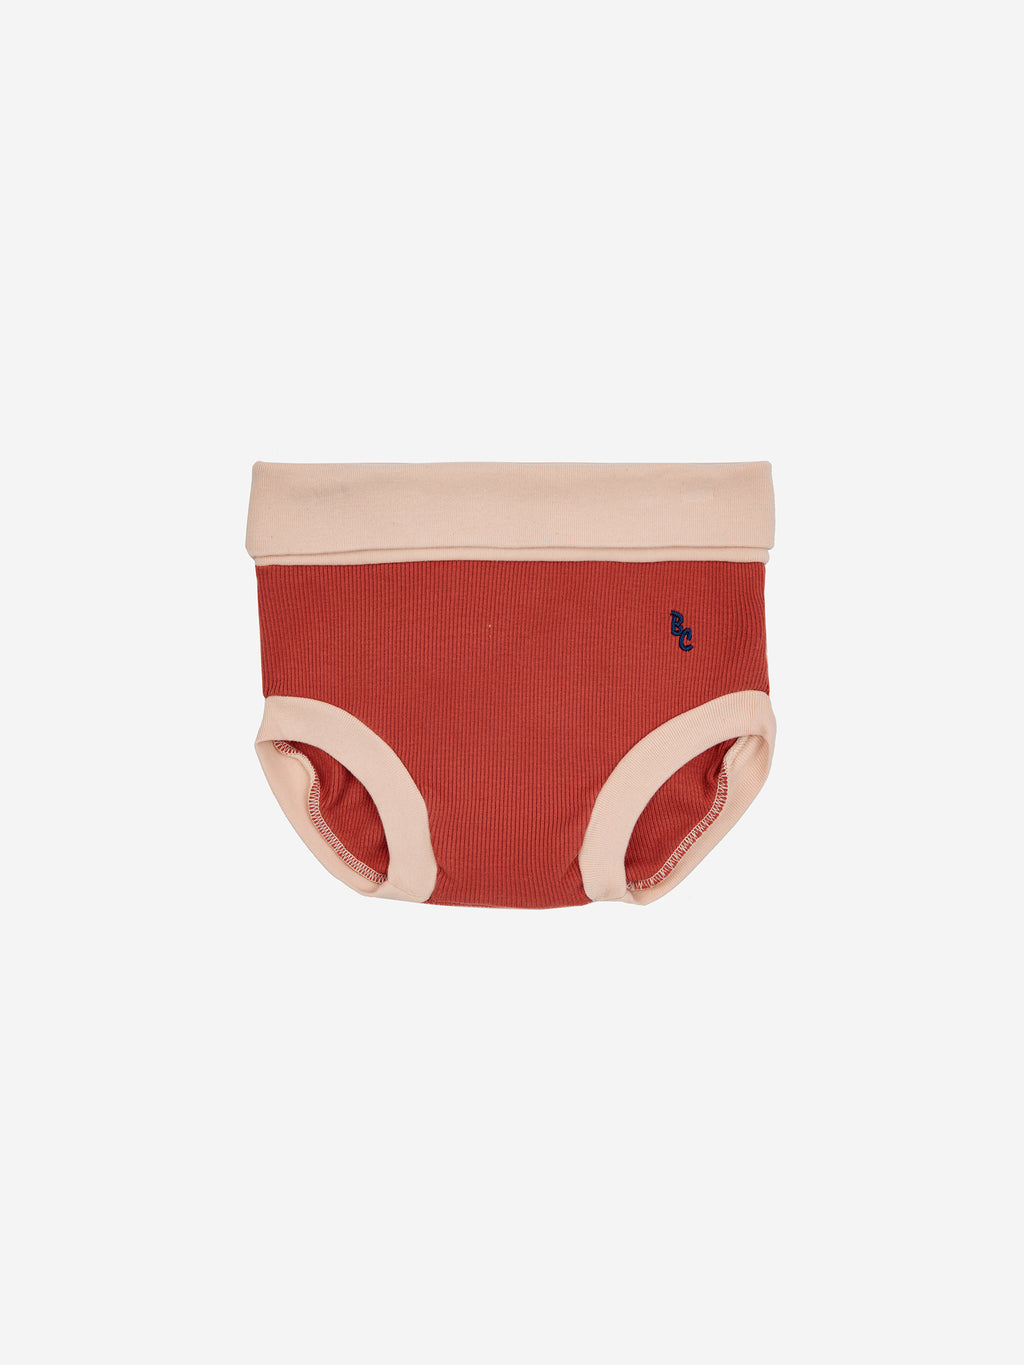 Bobo Choses Baby BC Red Culotte - Burgundy Red